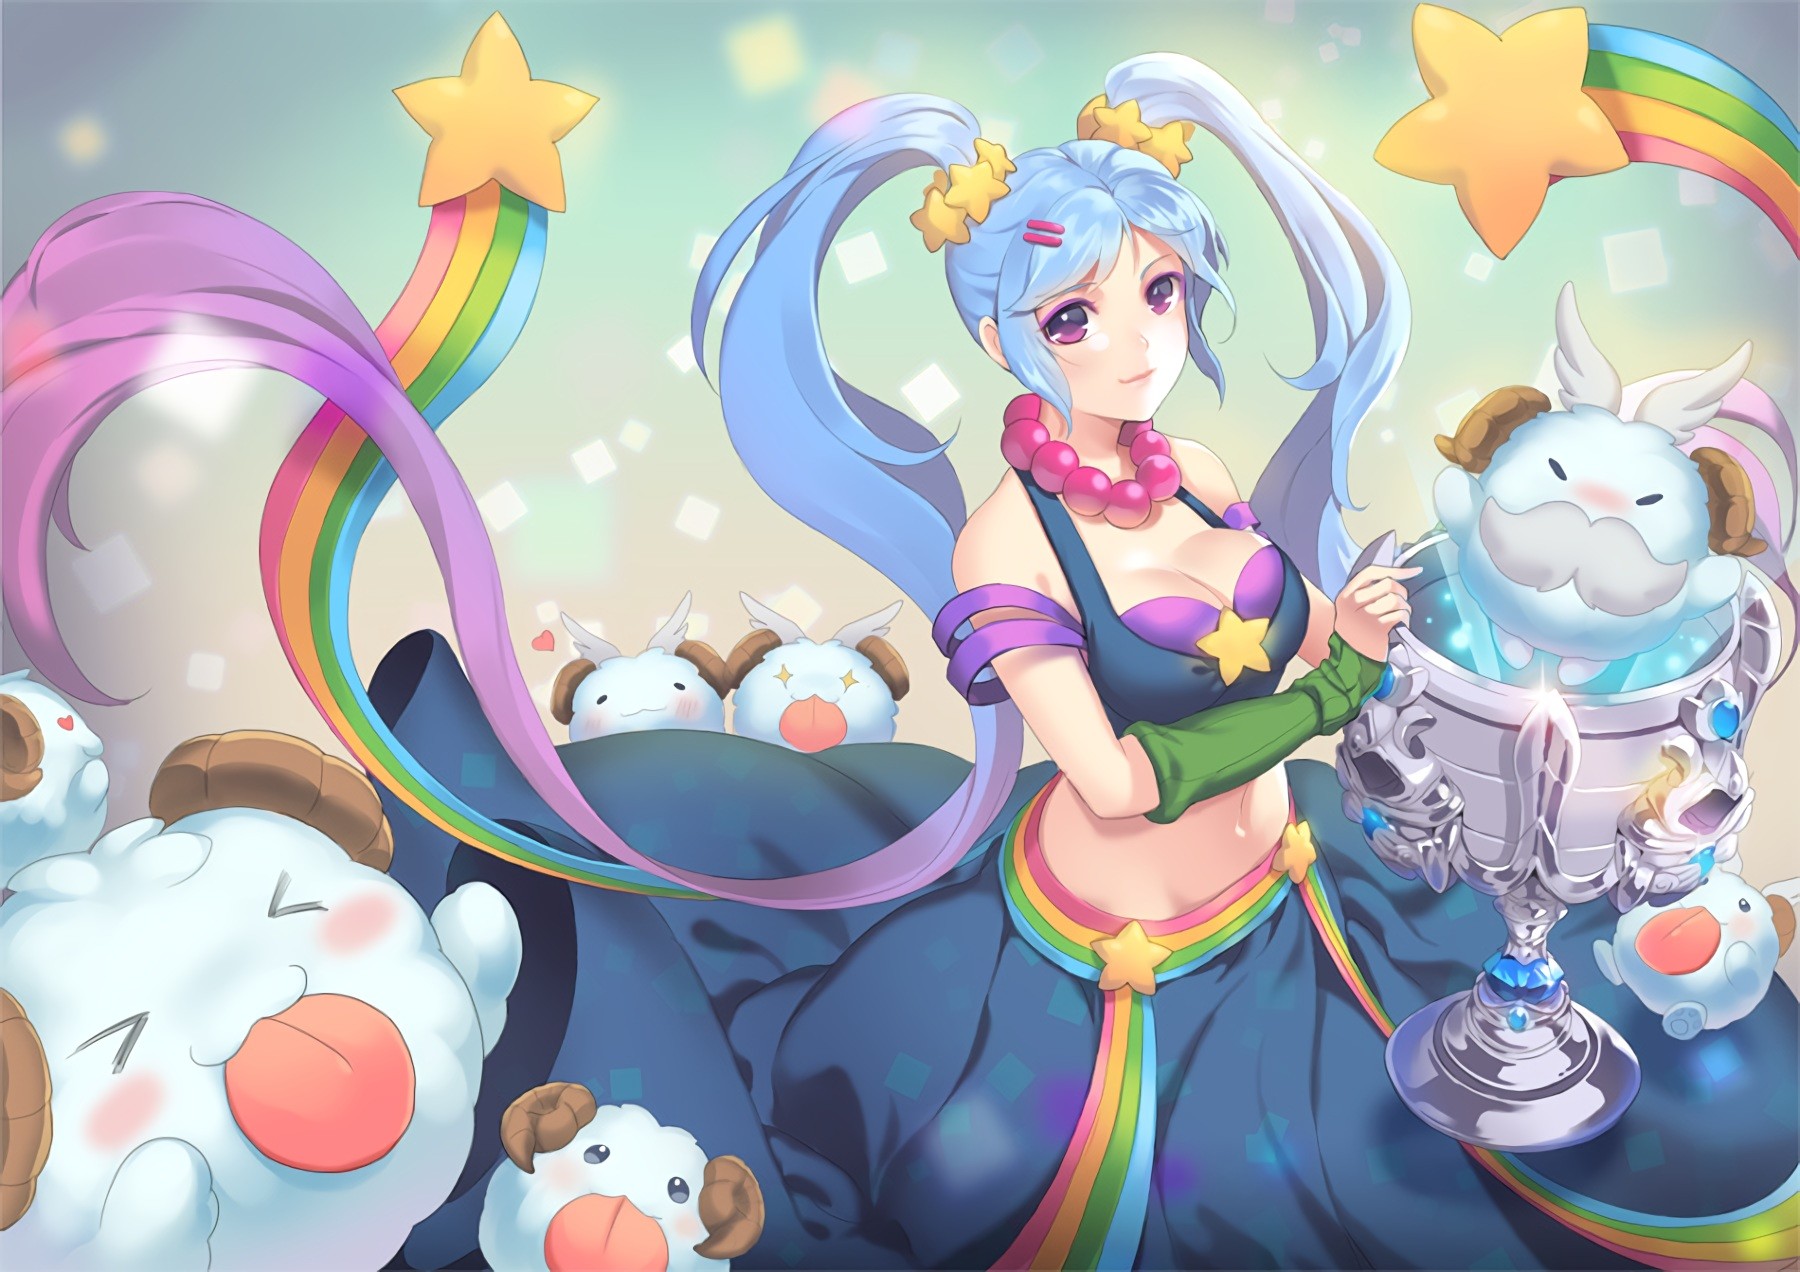 Anime 1800x1272 anime anime girls League of Legends blue hair purple eyes cleavage long hair twintails Sona (League of Legends) Poro boobs sheep animals mammals DeviantArt fantasy art fantasy girl belly fan art PC gaming video game girls video game characters